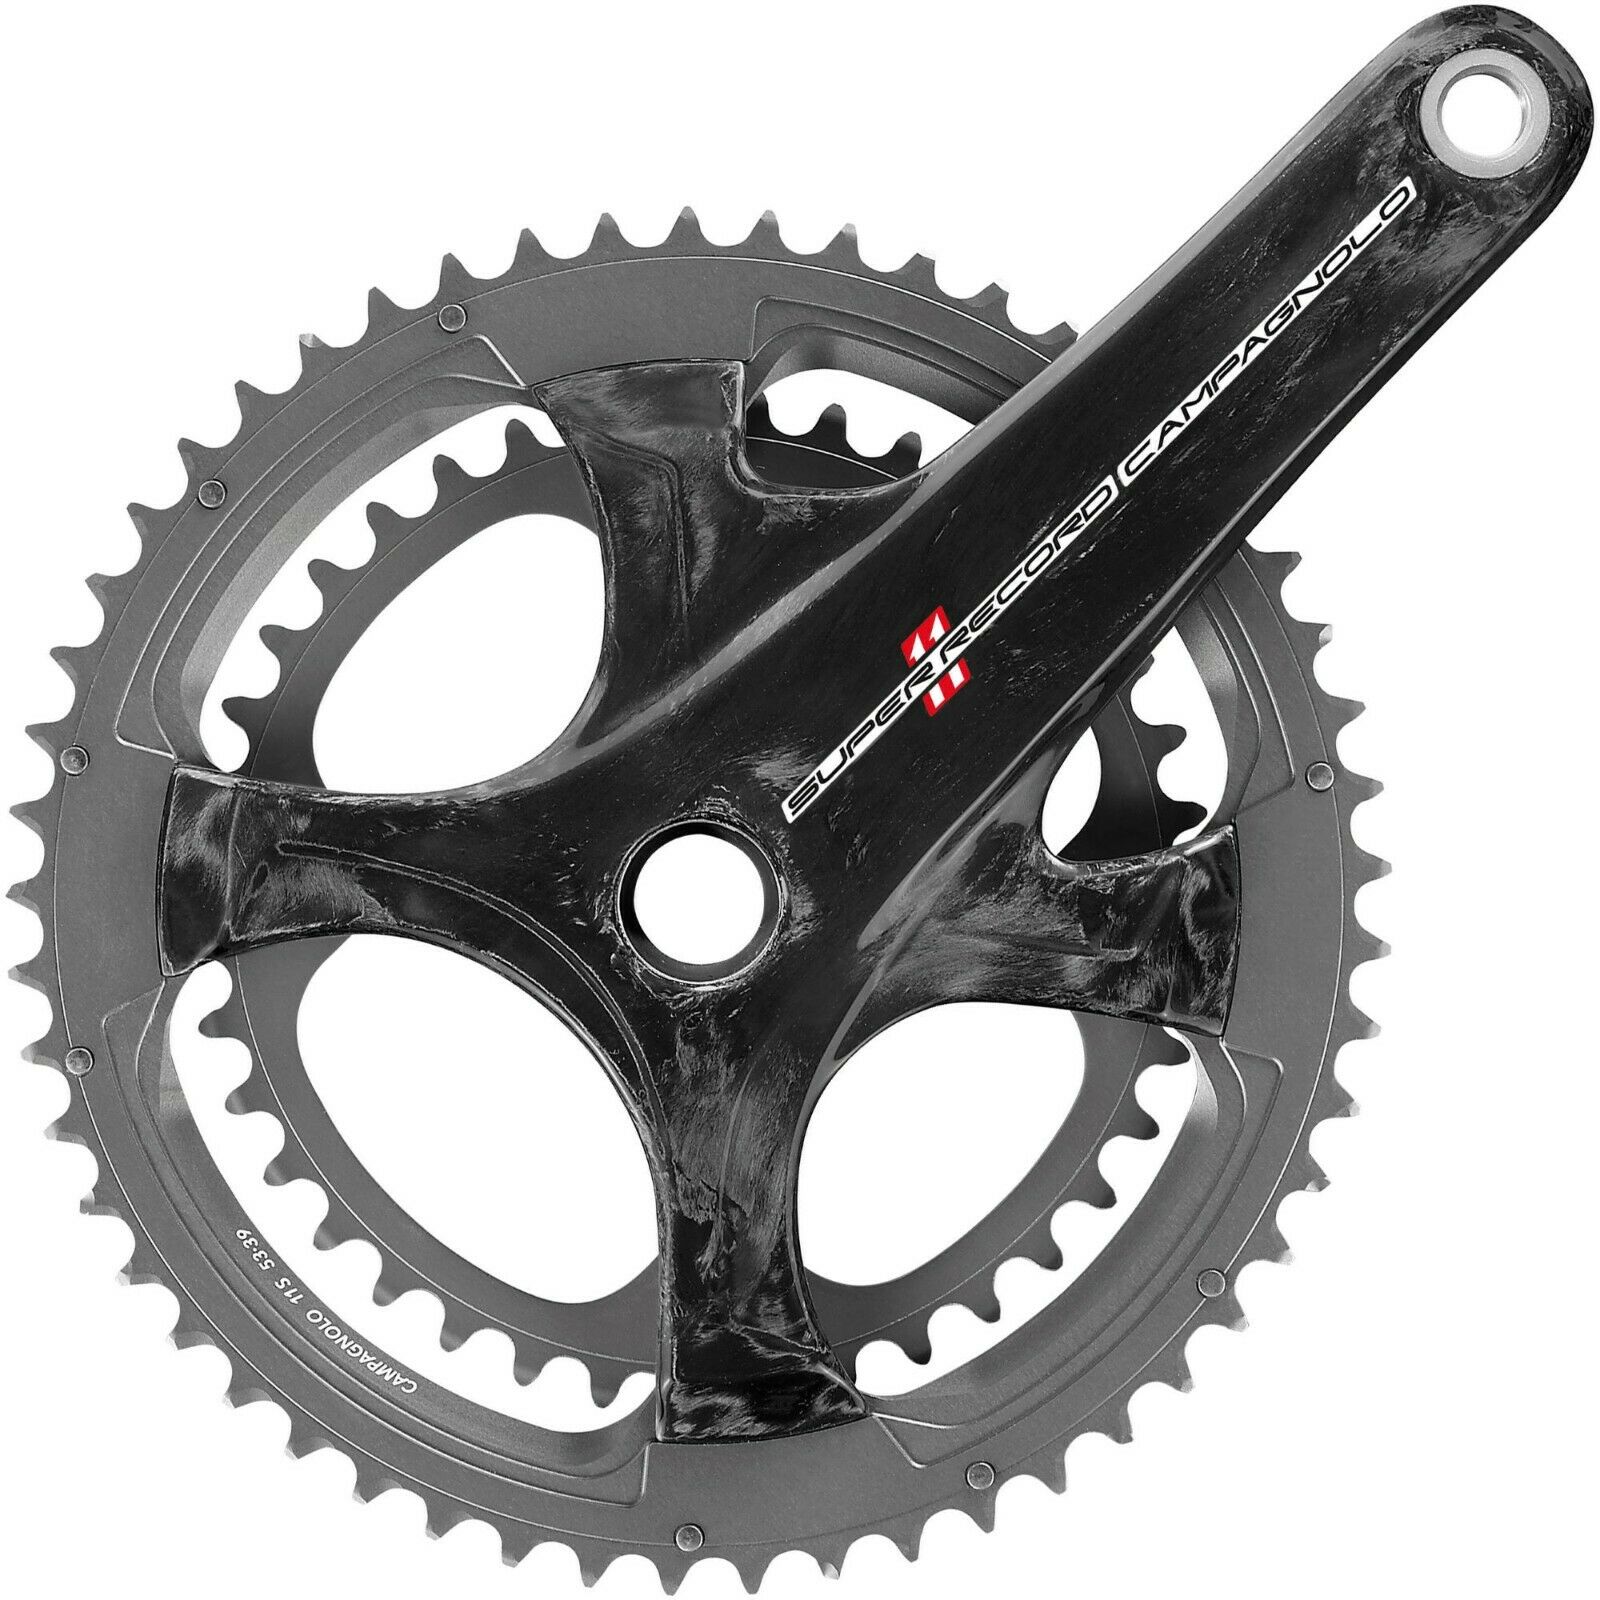 Campagnolo Super Record Ultra Torque 11 Speed Chainset - 53 / 39t 